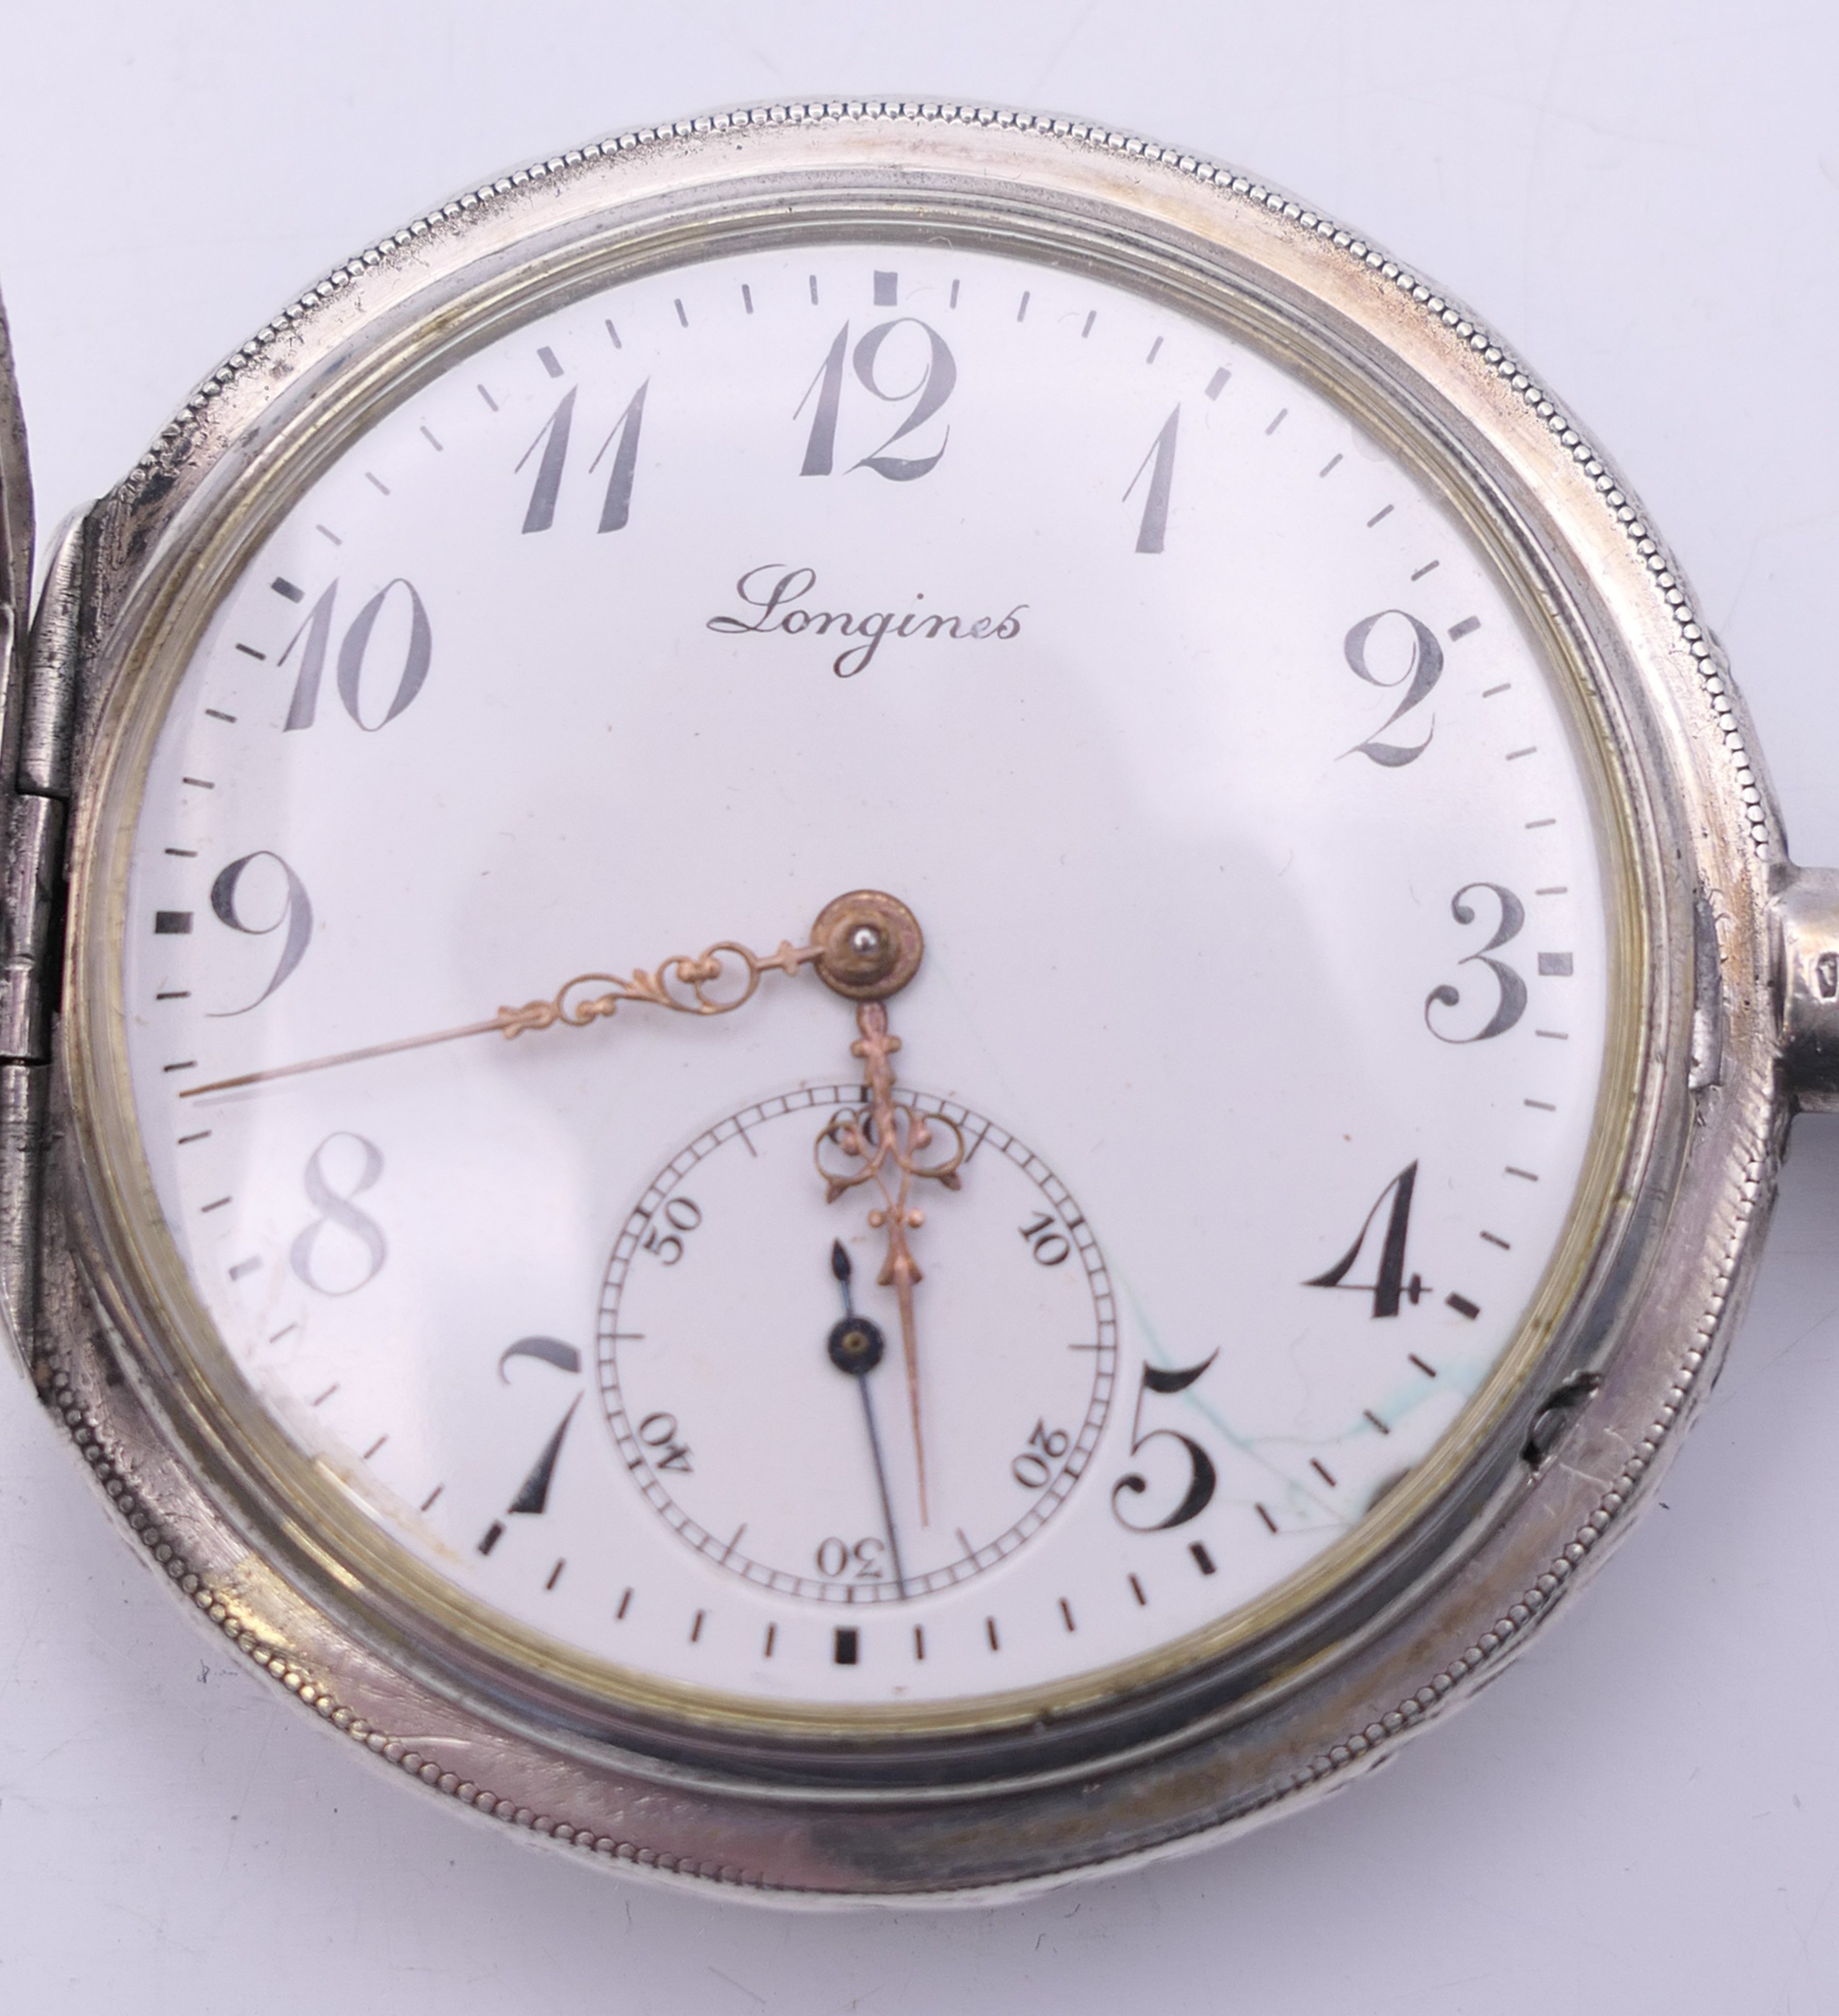 A Swiss Longines Grand Prix Paris 1900 800 silver full hunter pocket watch, serial number 2030641. - Image 4 of 9